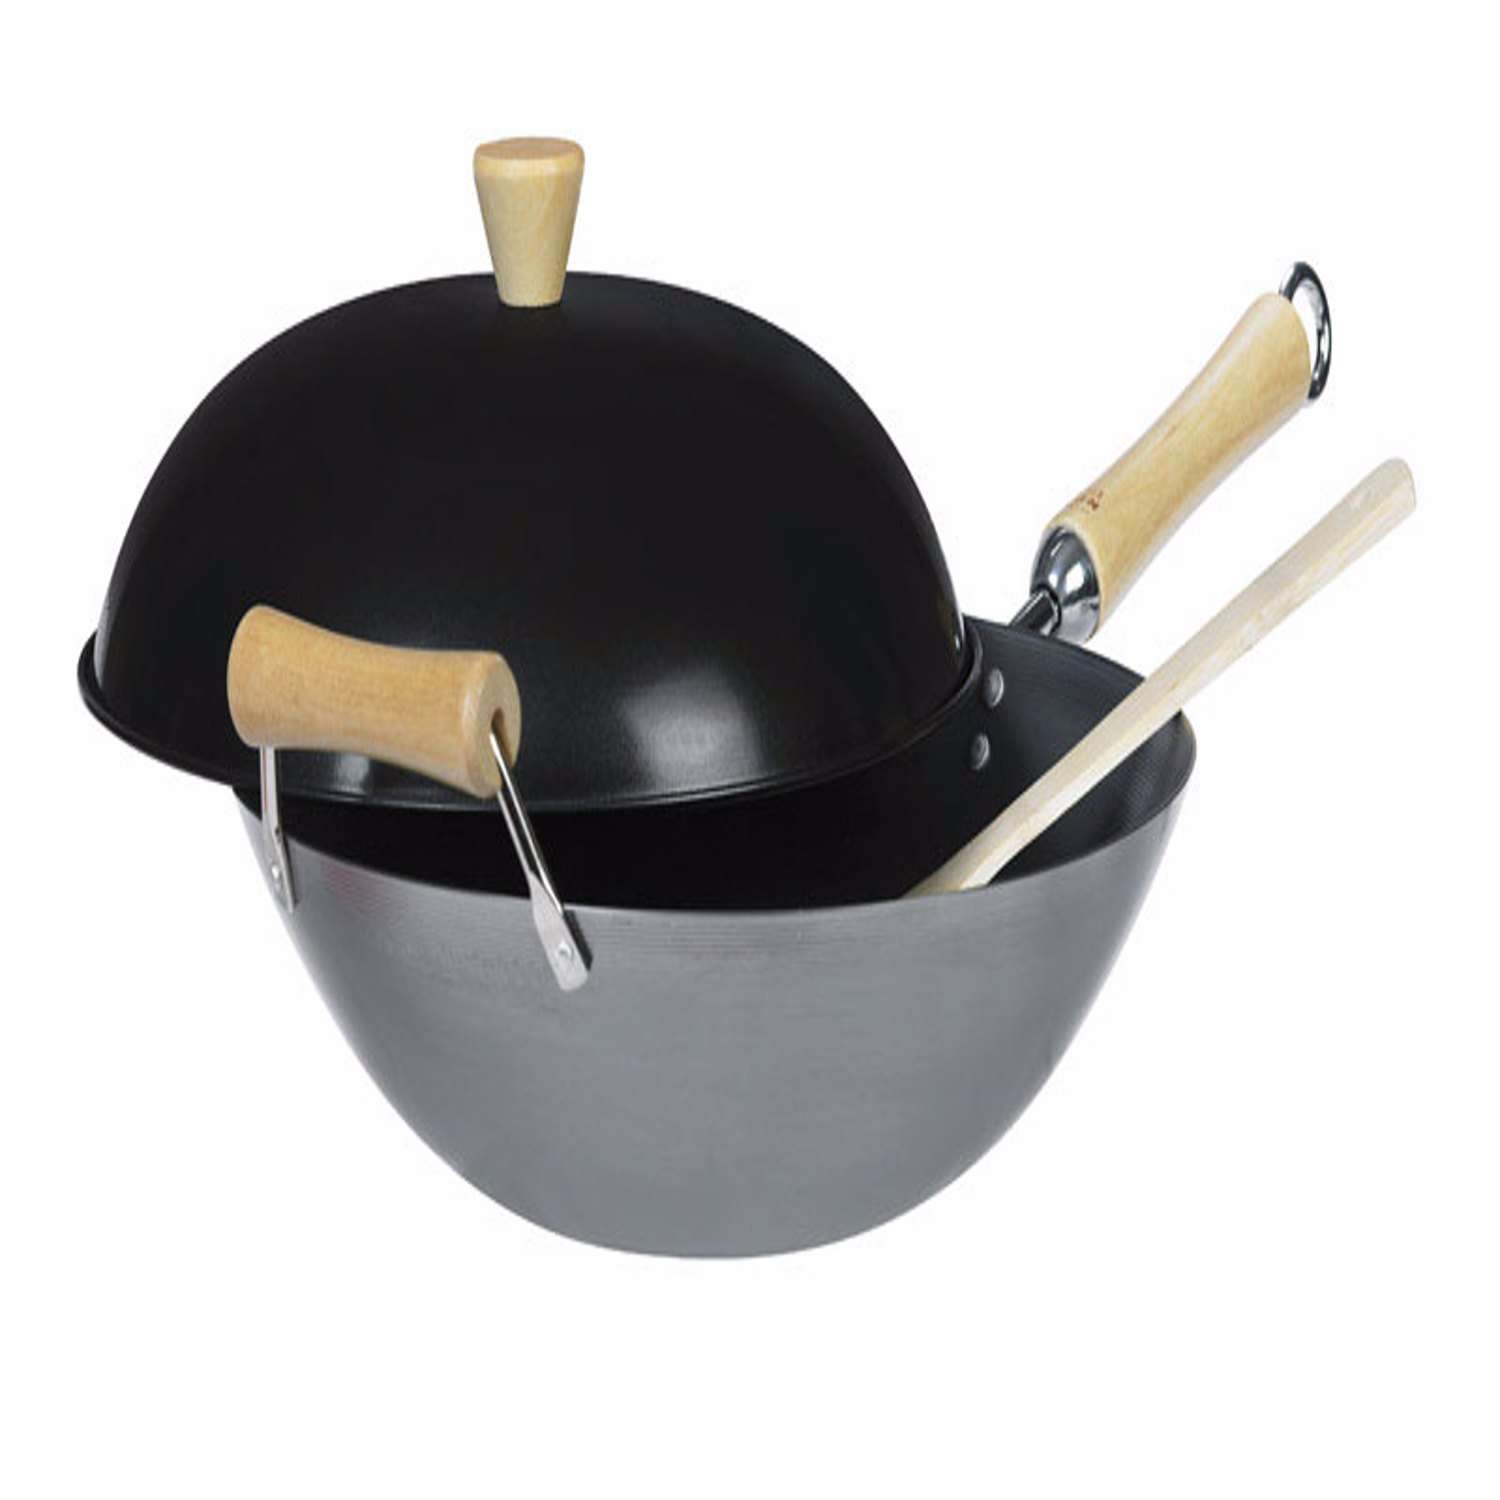 Big Green Egg Carbon Steel Wok with Bamboo Spatula